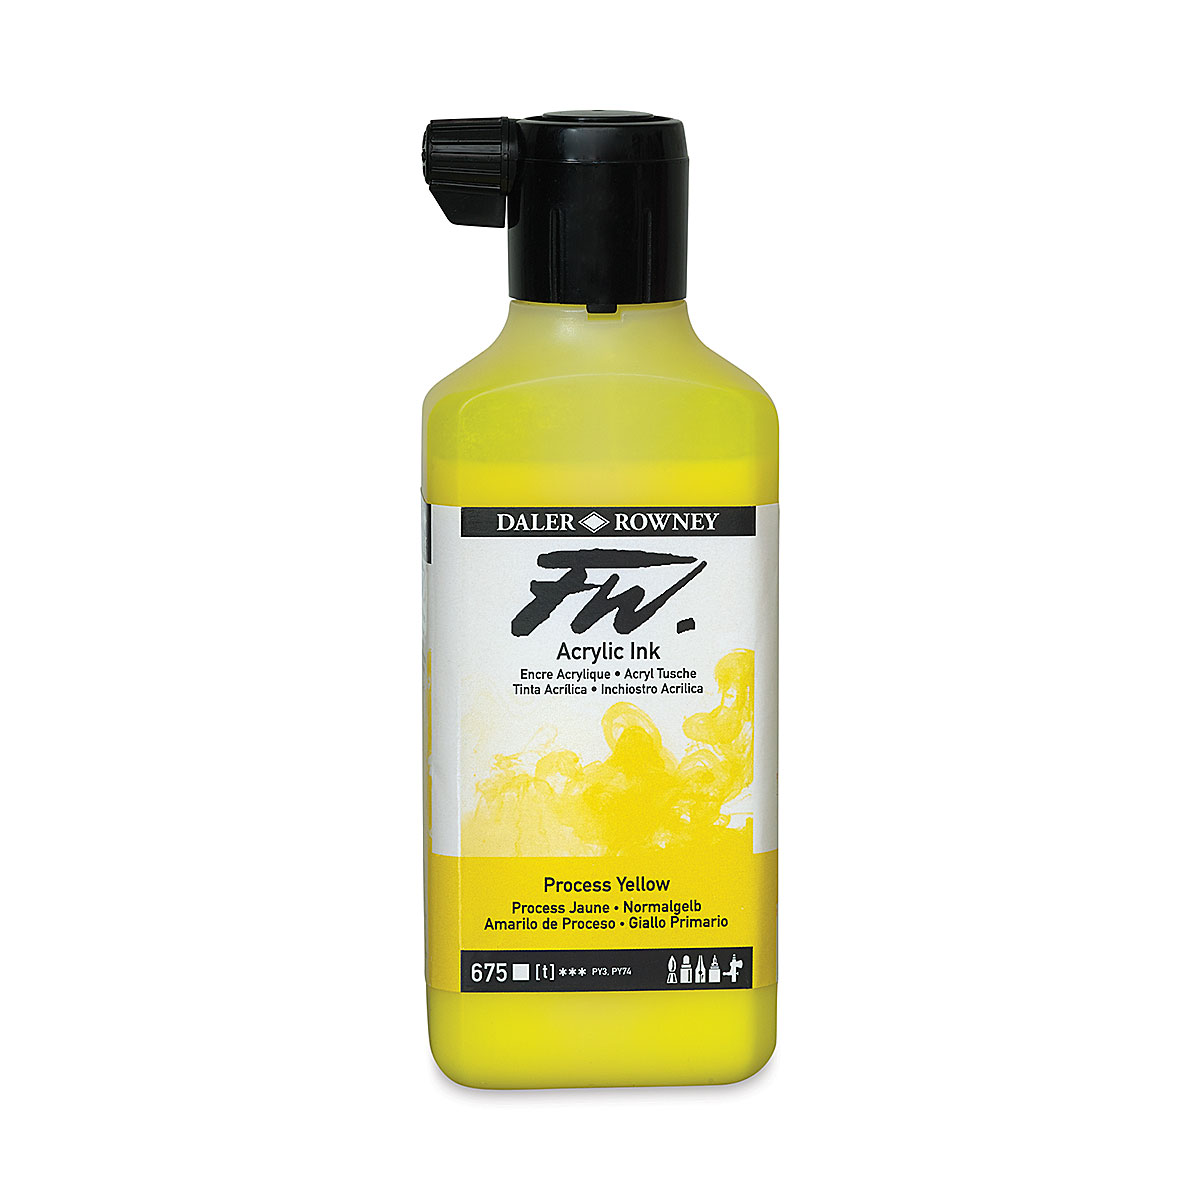 Daler-Rowney FW Acrylic Ink Bottle Brilliant Yellow - Versatile Acrylic  Drawing Ink for Artists and Students - Permanent Calligraphy Ink - Archival  Ink for Illustrating and More